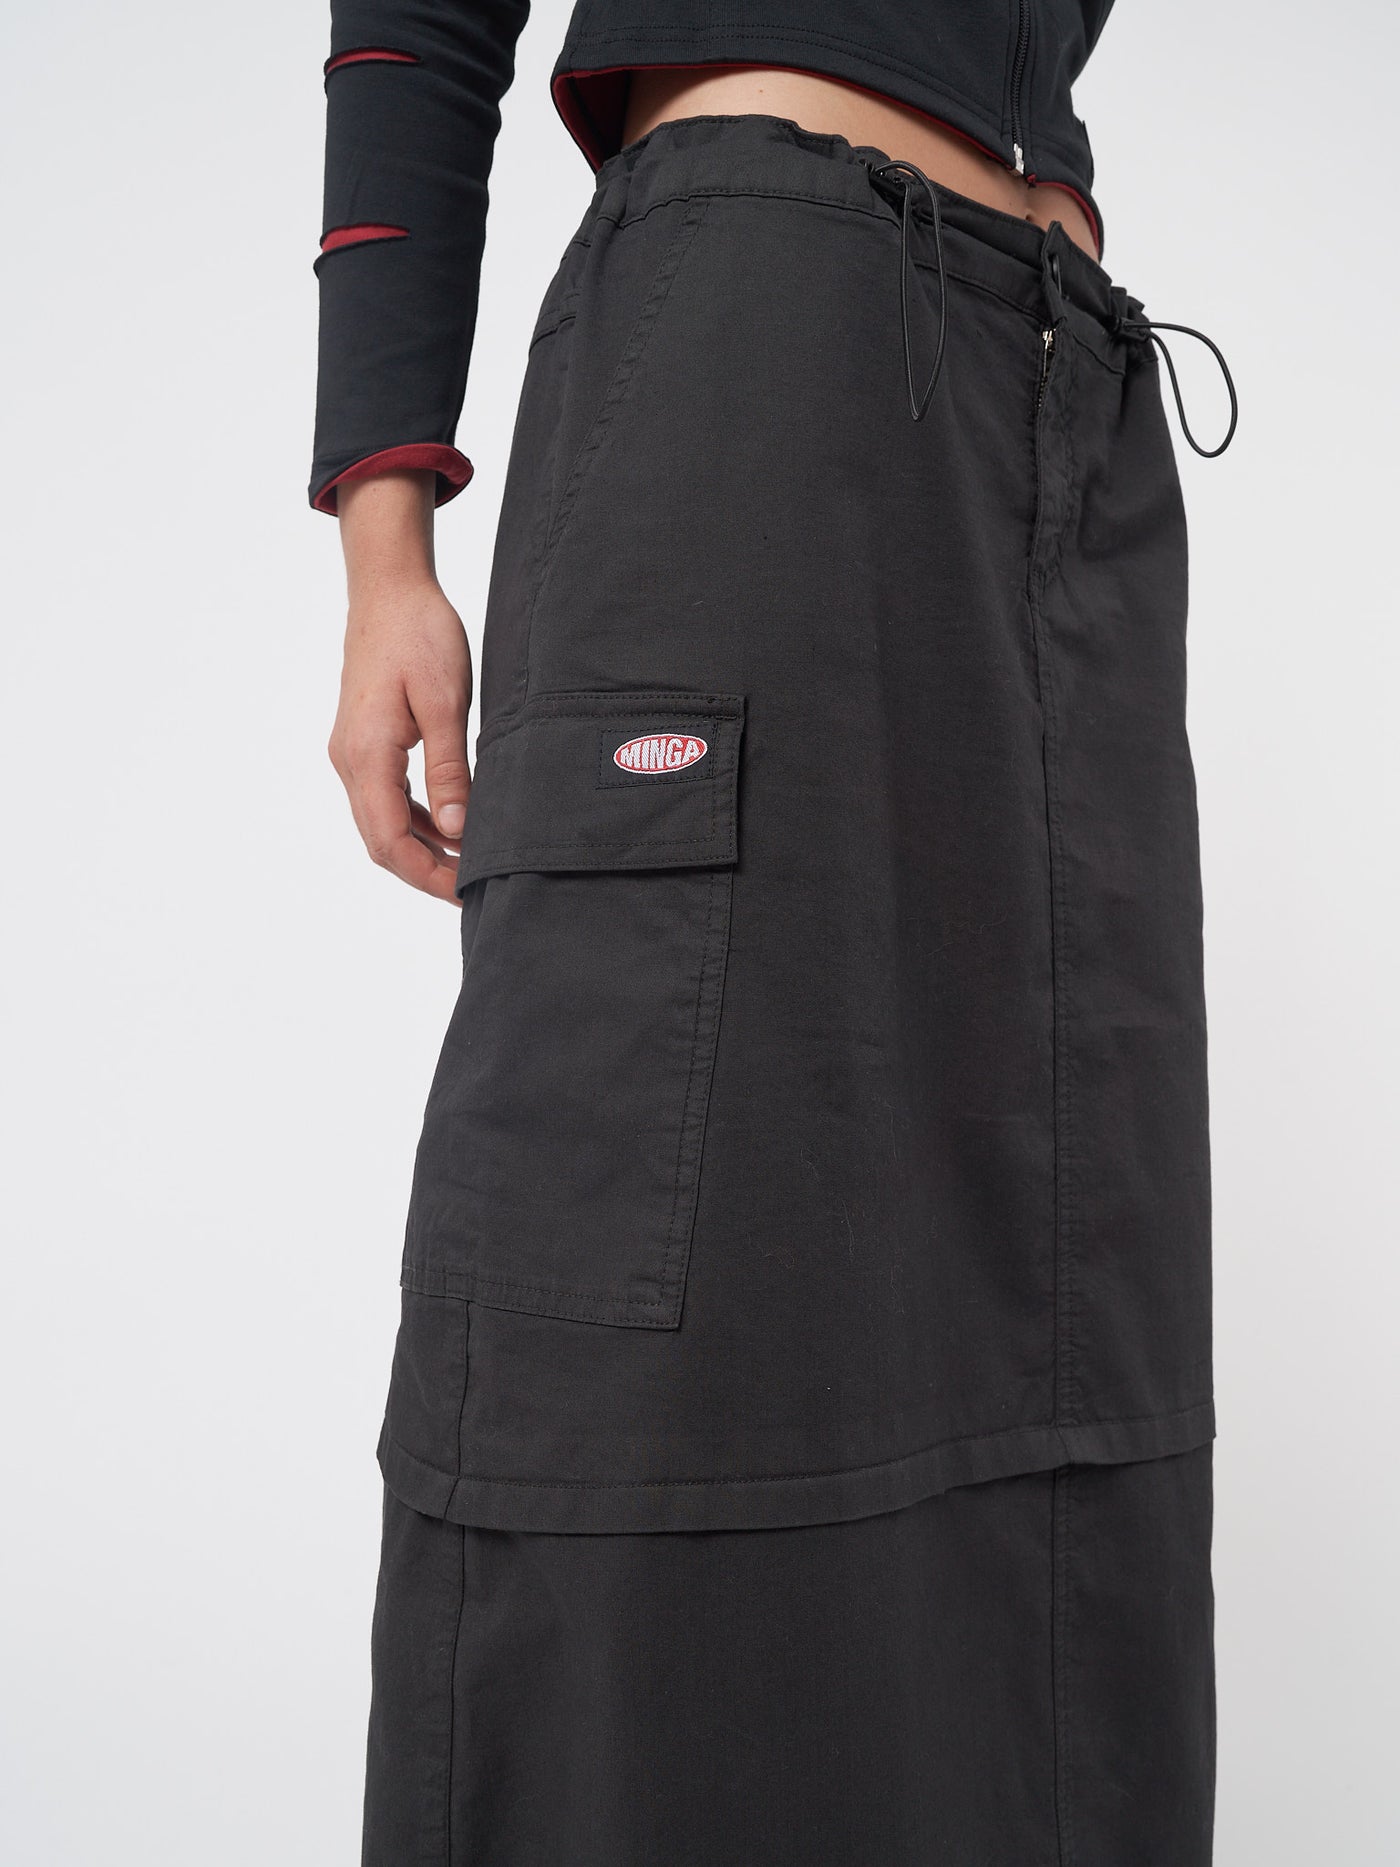 Black cargo maxi skirt in parachute style with side utility cargo pockets